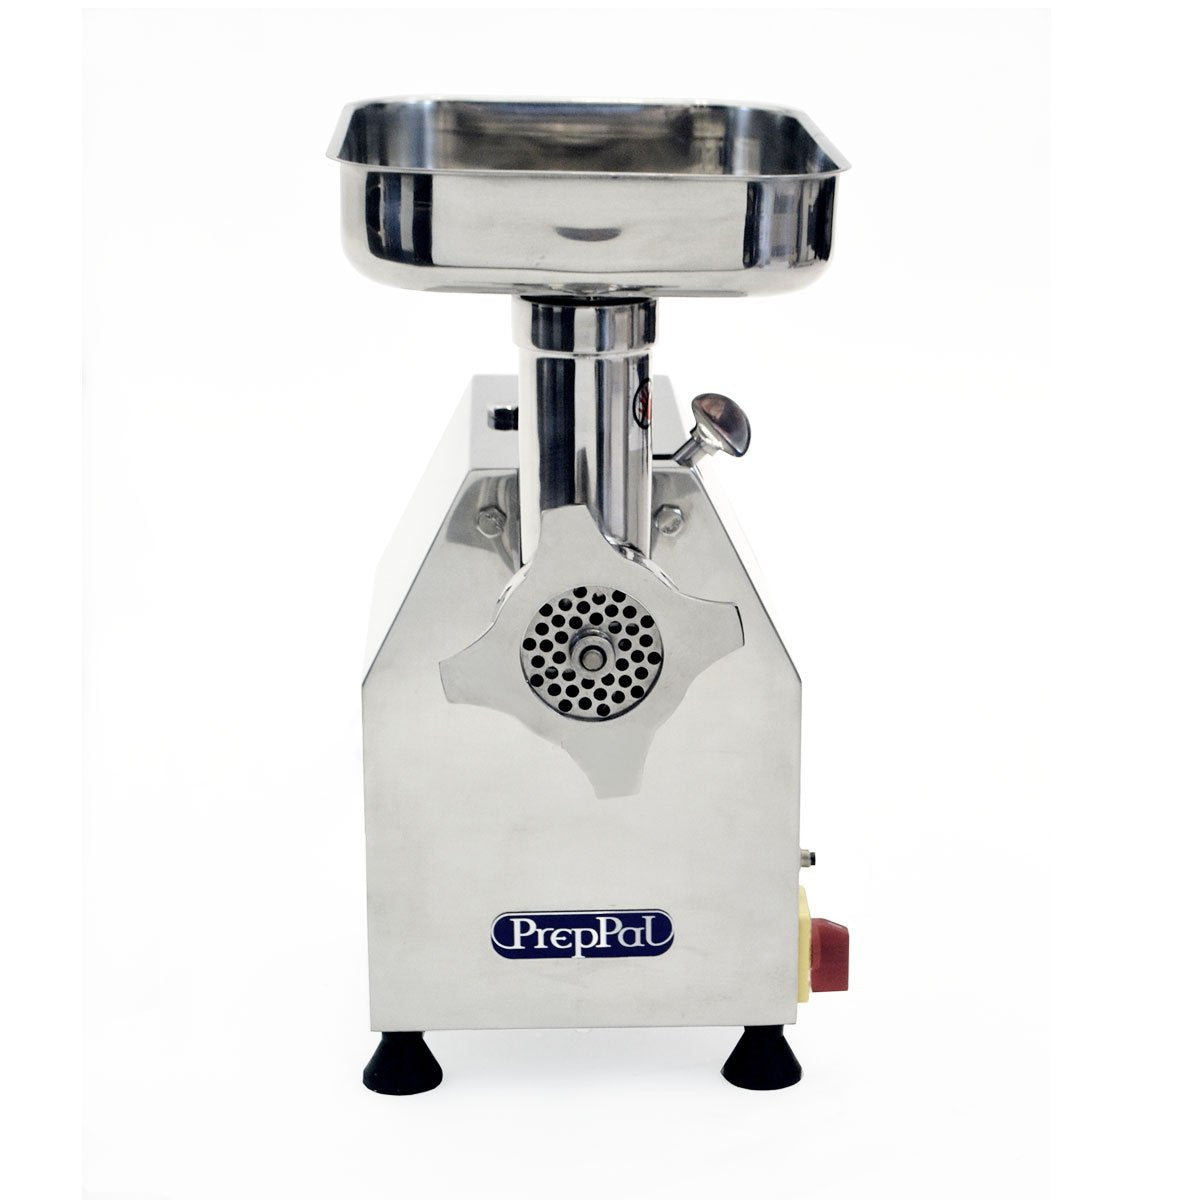 Atosa PrepPal PPG-22 Electric Meat Grinders w/#22 hub, 1.5 HP